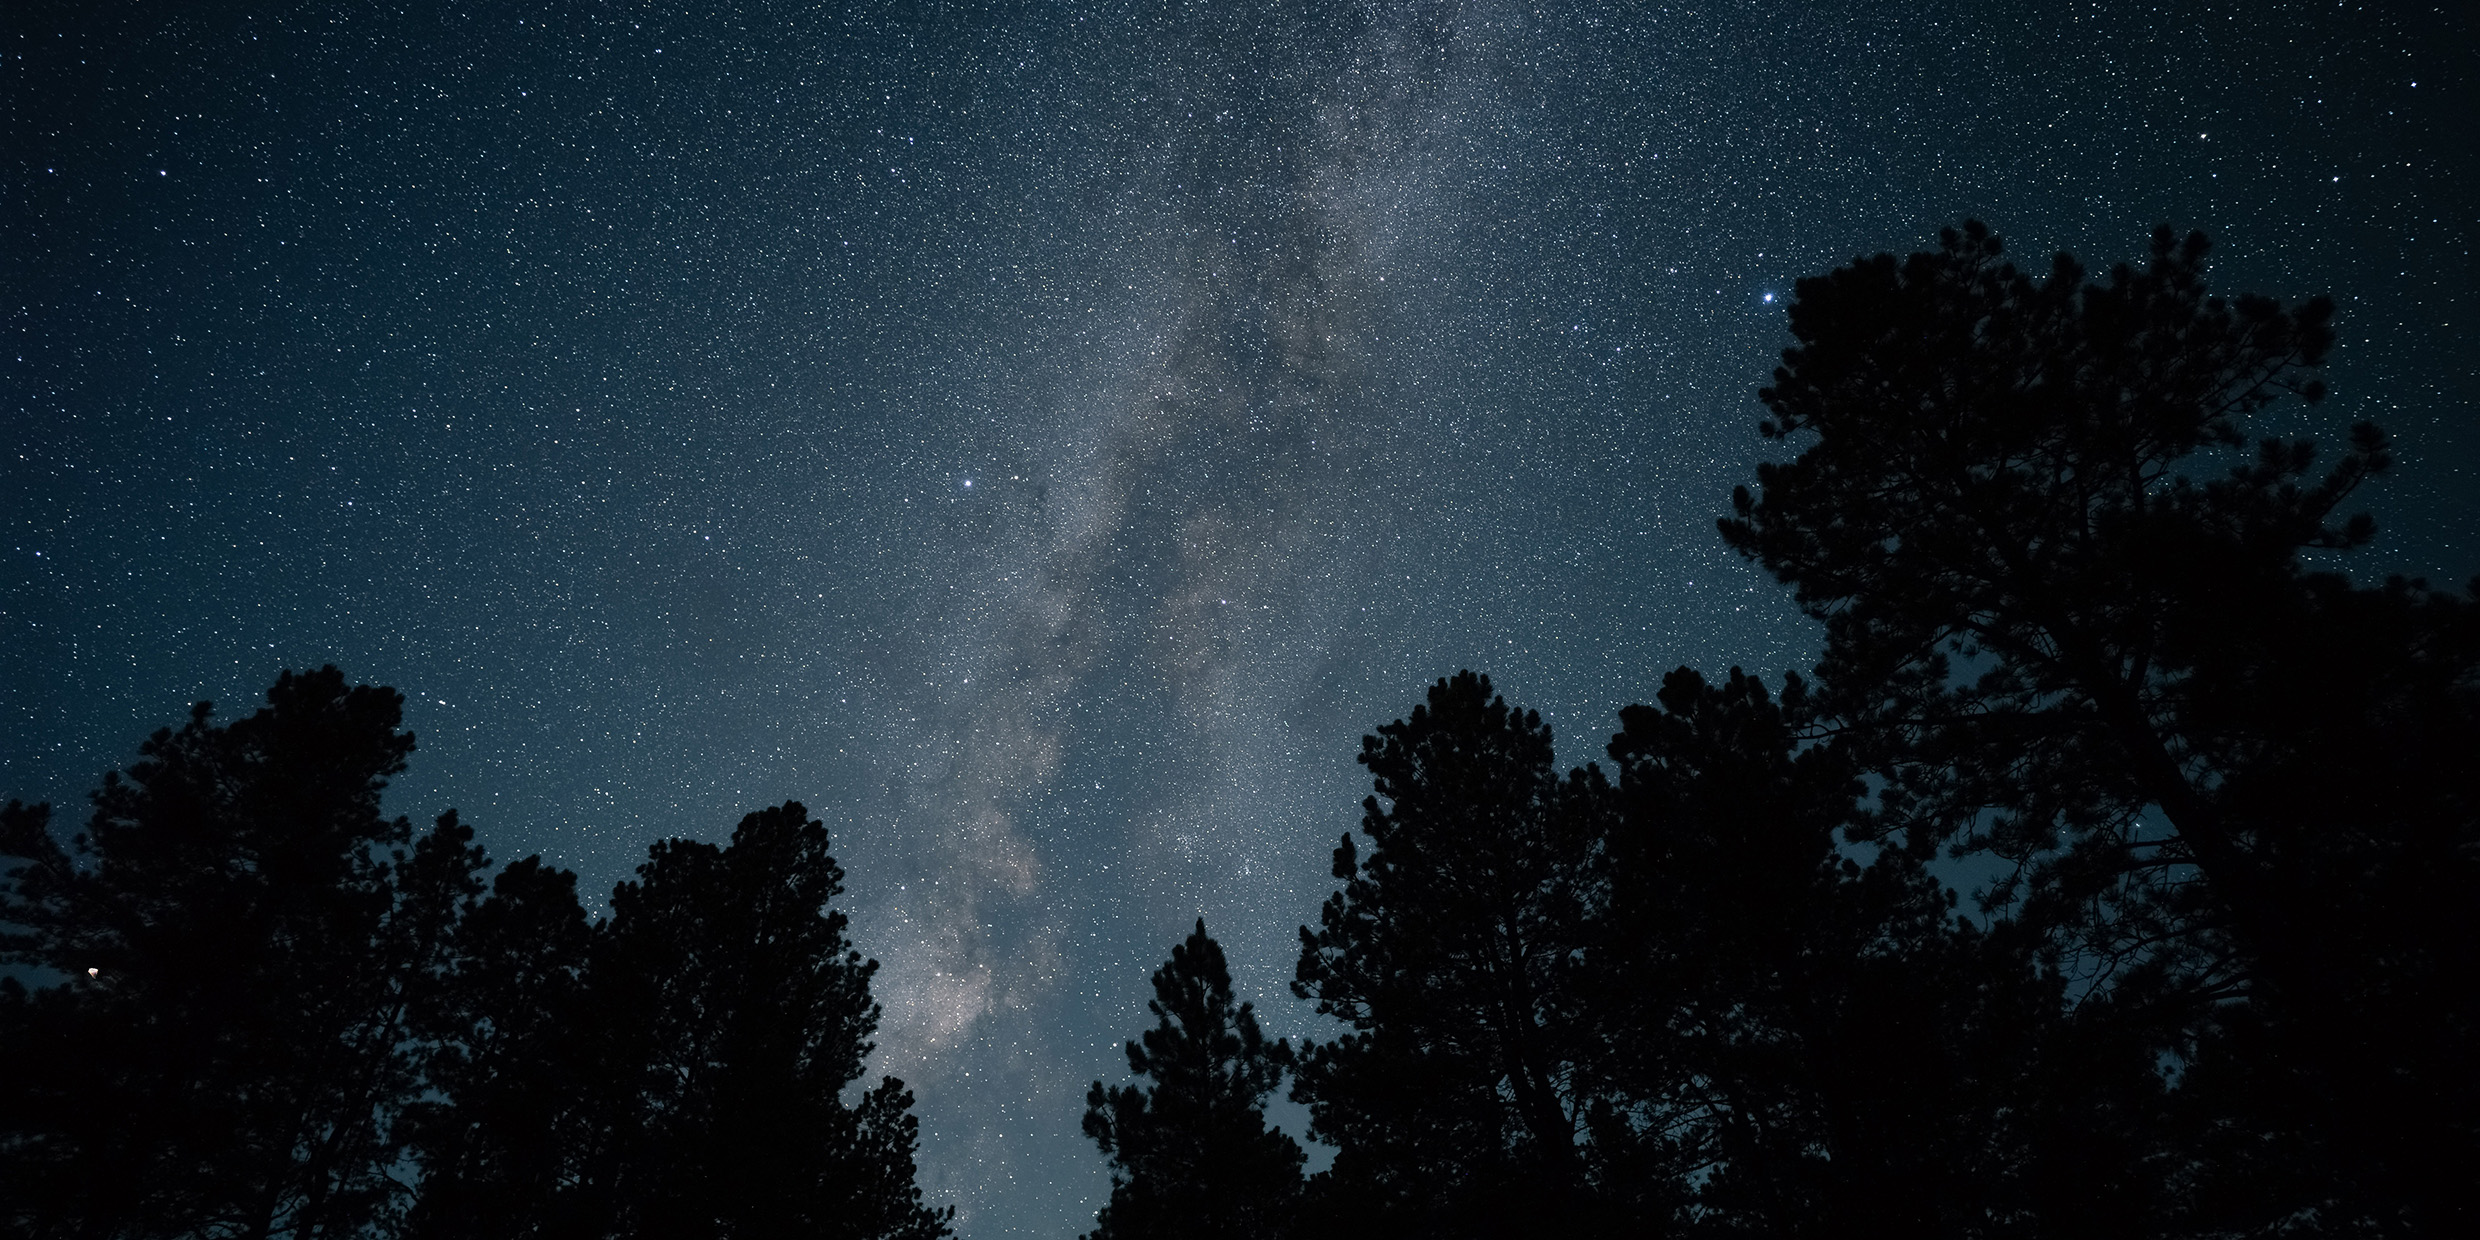 Image of night sky over trees